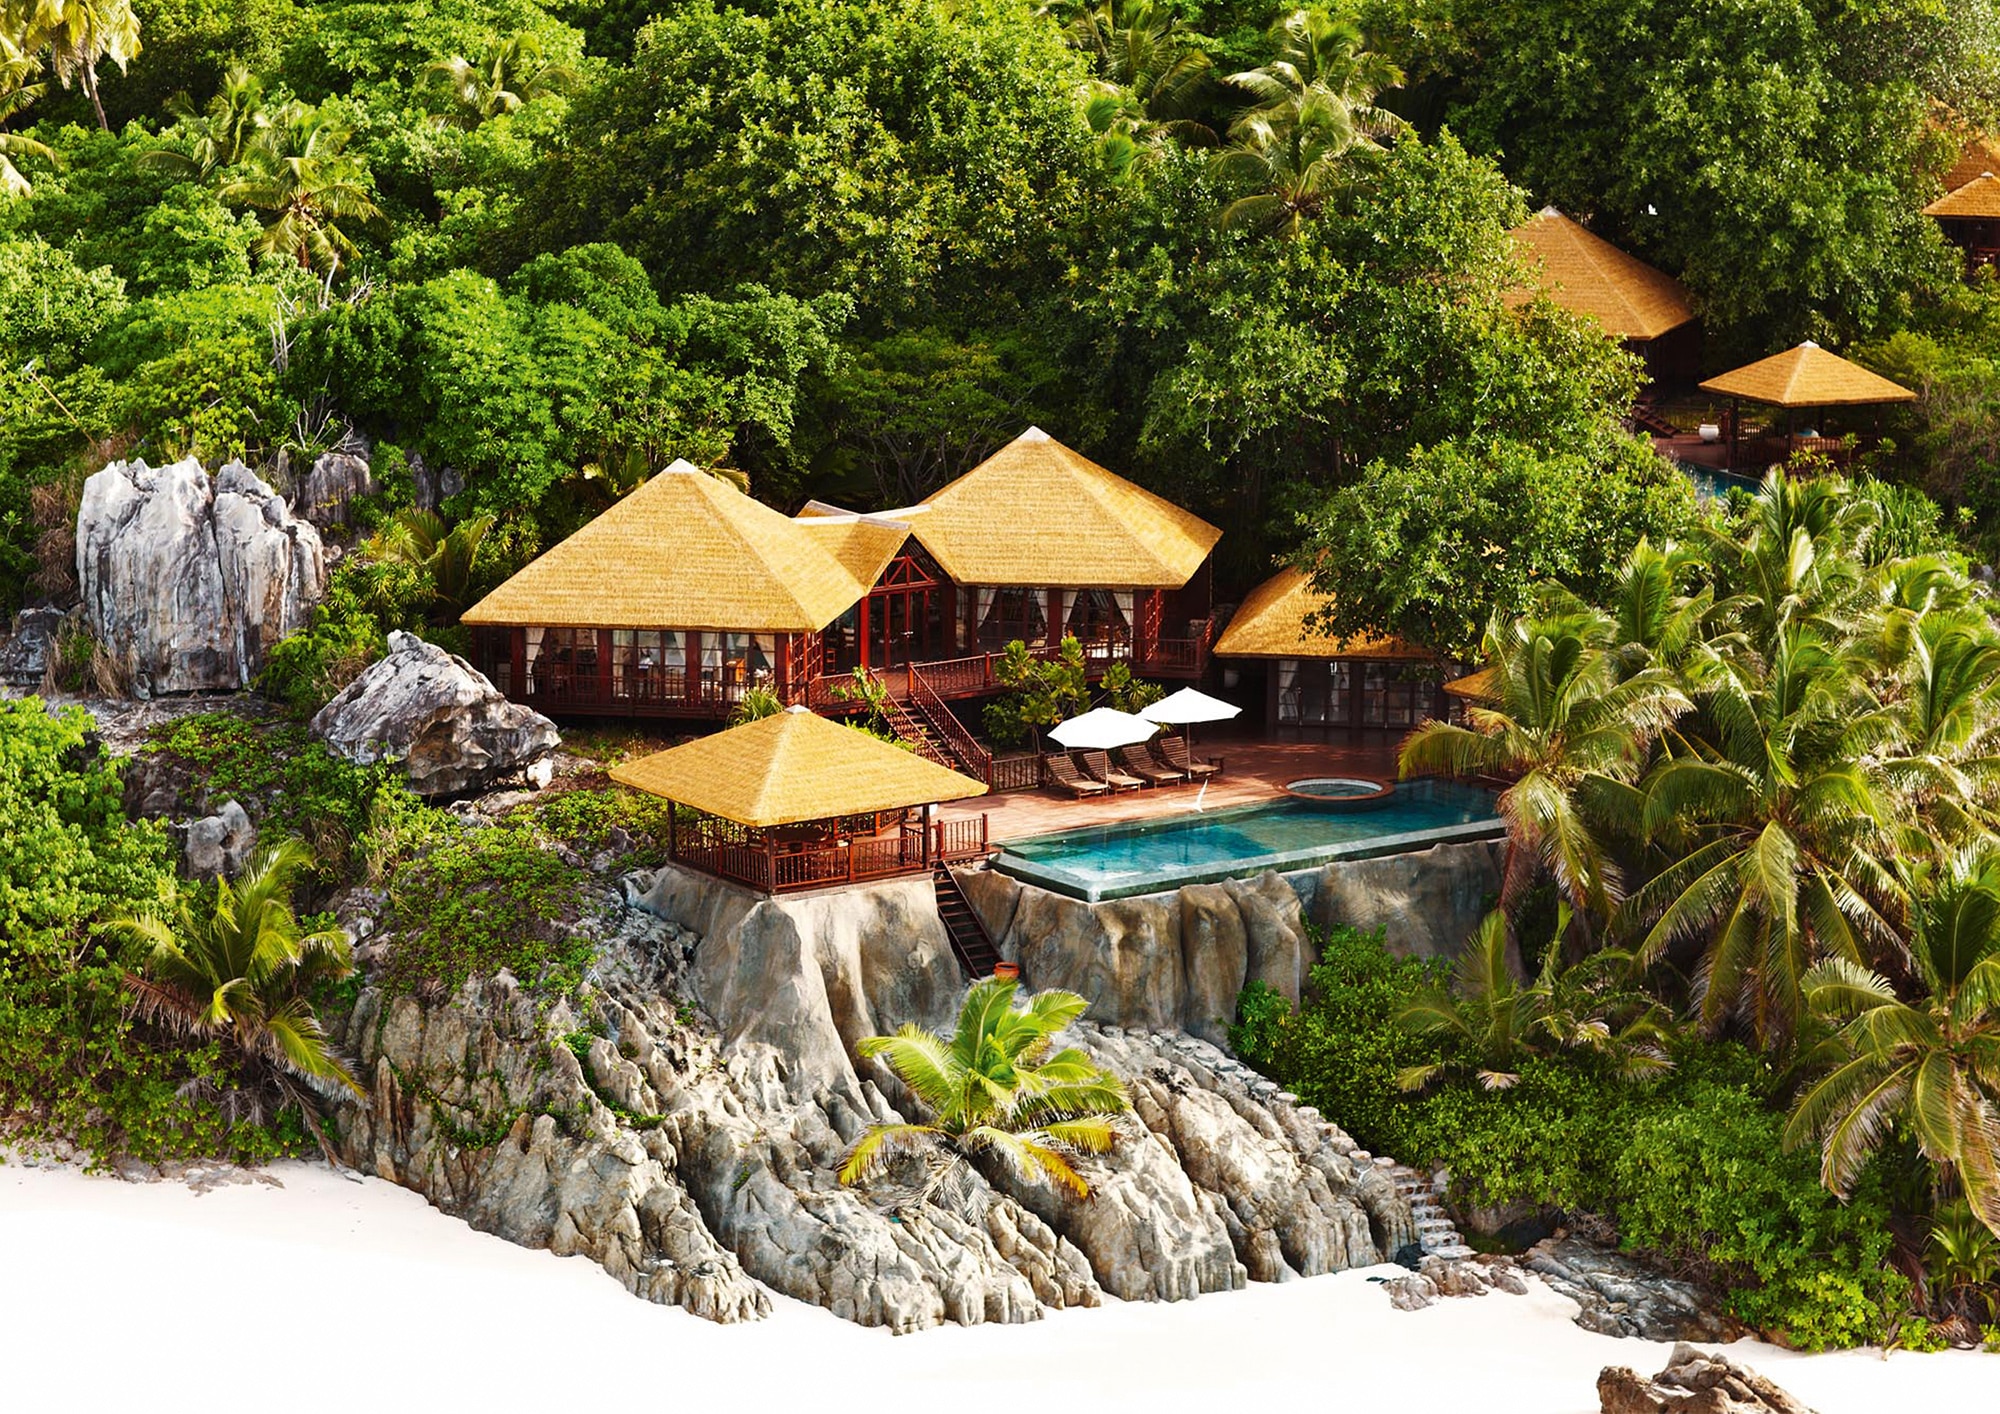 Private Islands to Rent for Romantic Getaways: Fregate Island